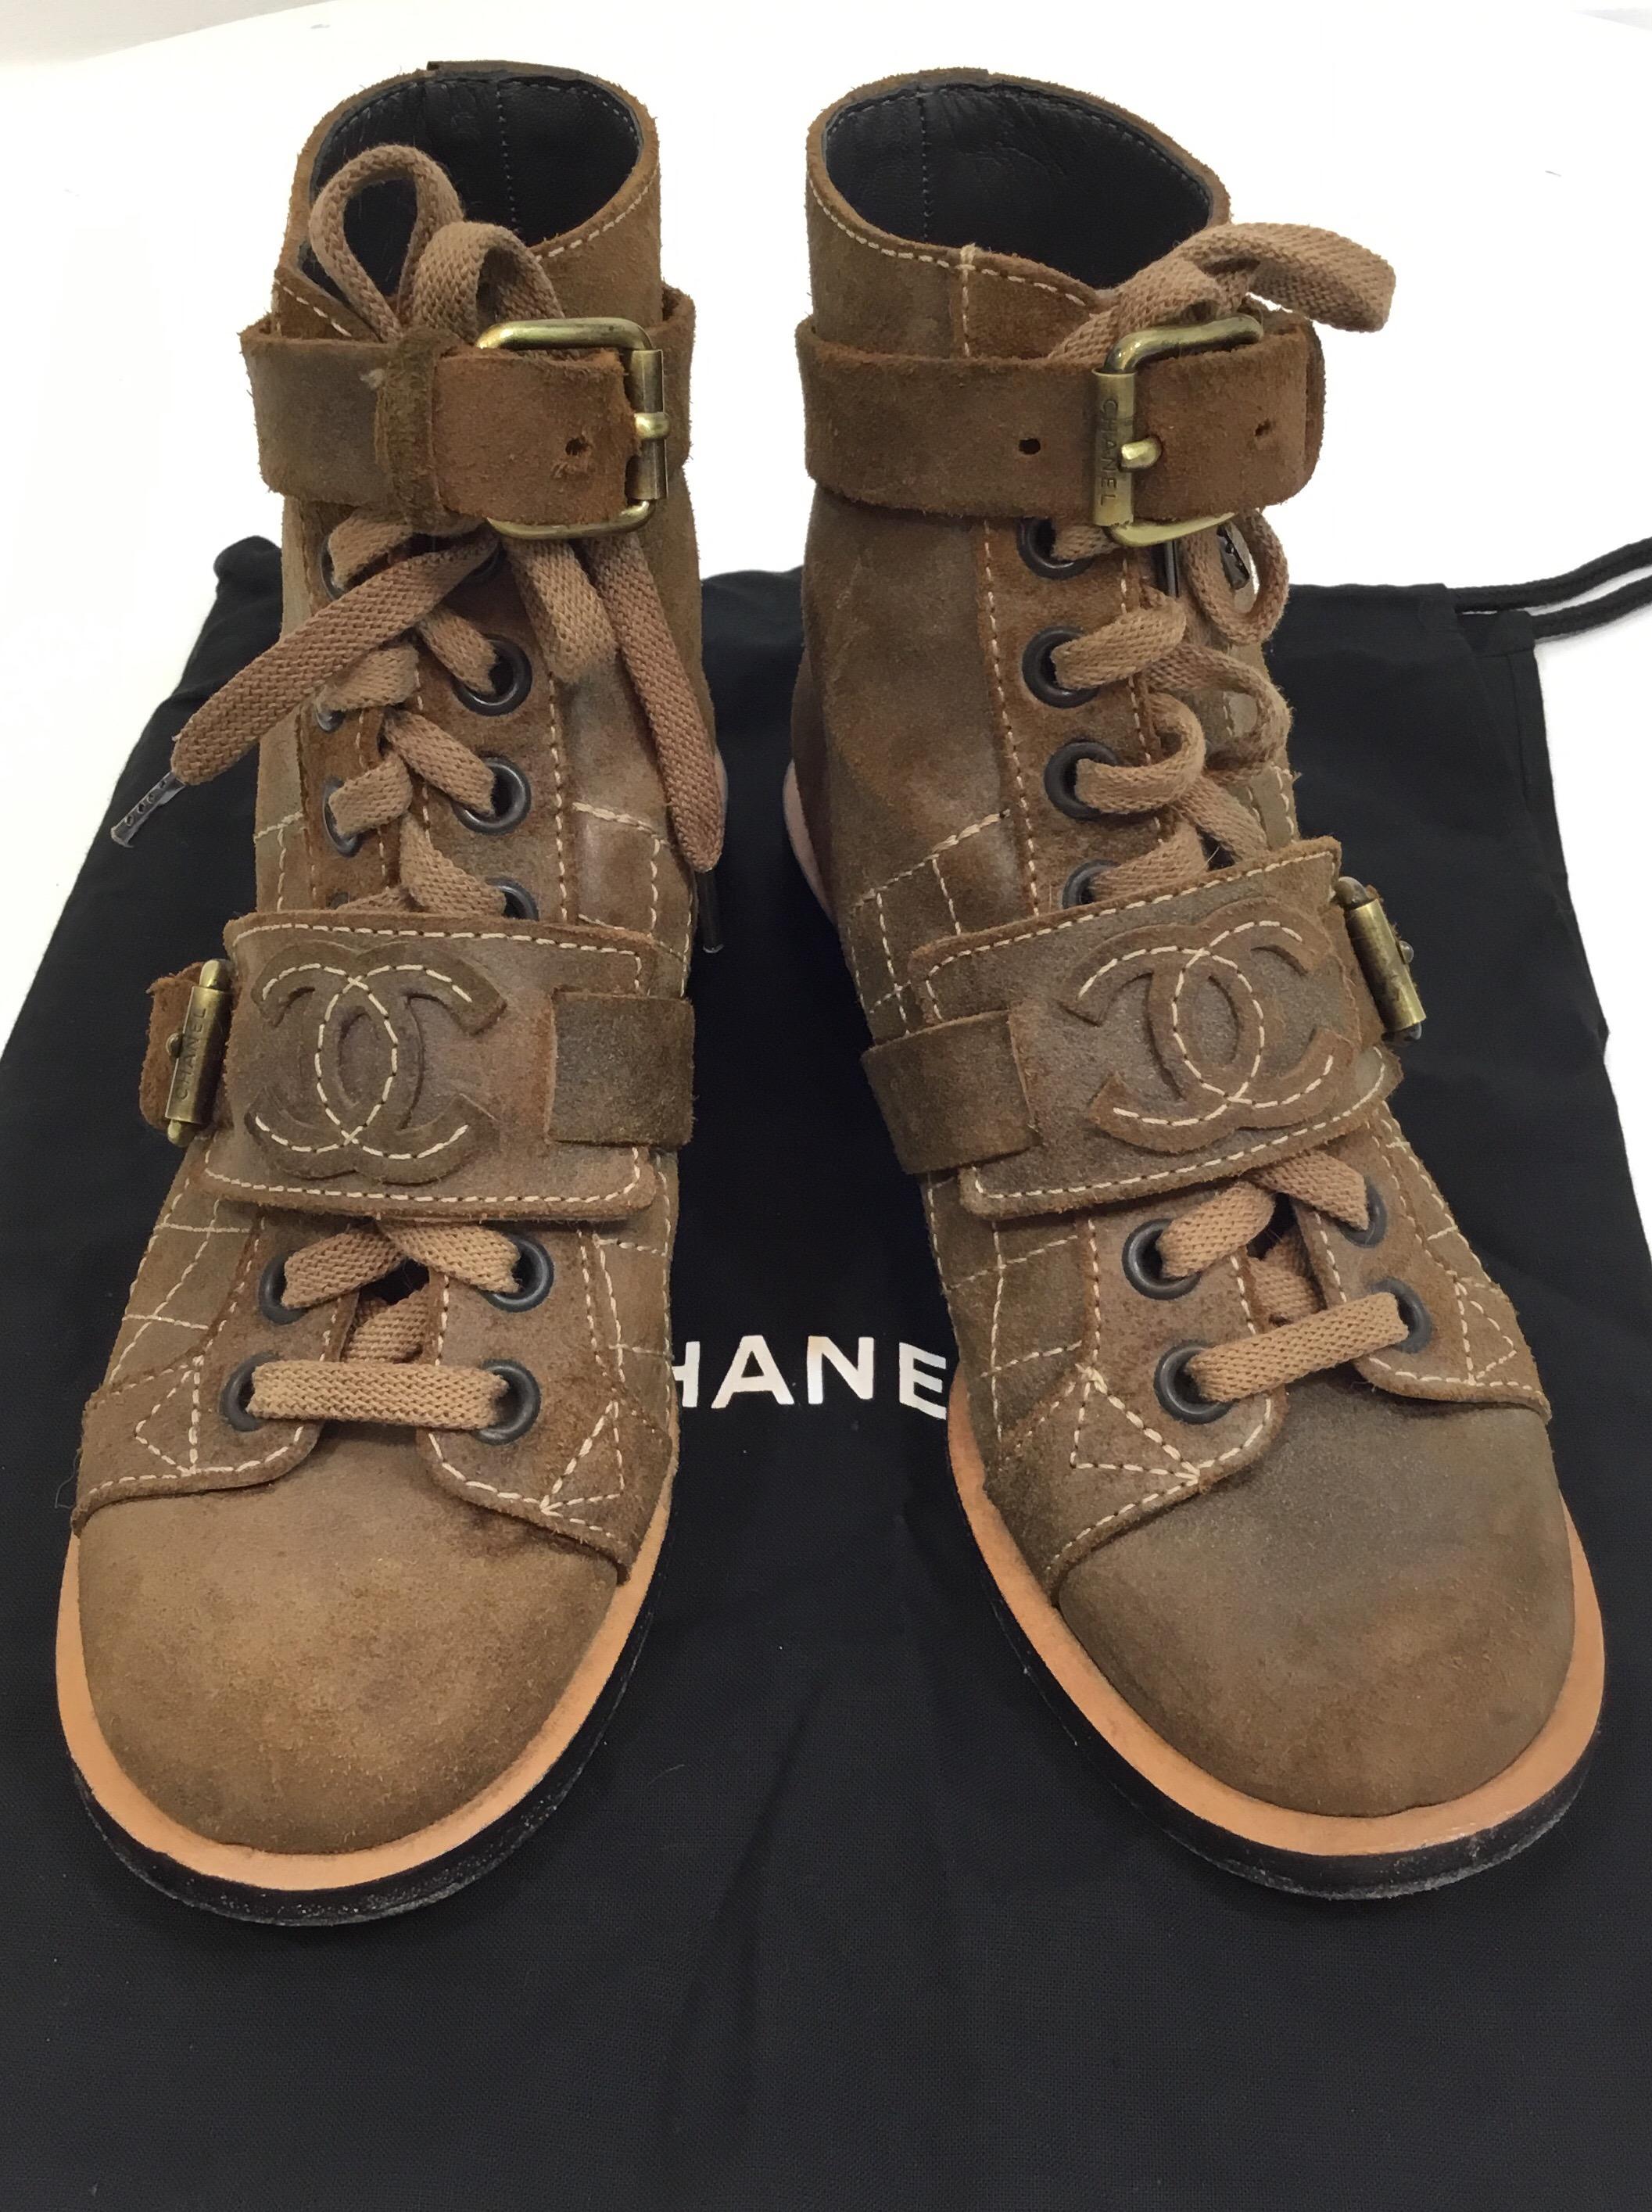 Chanel Suede Distressed Combat Boots, 36 1